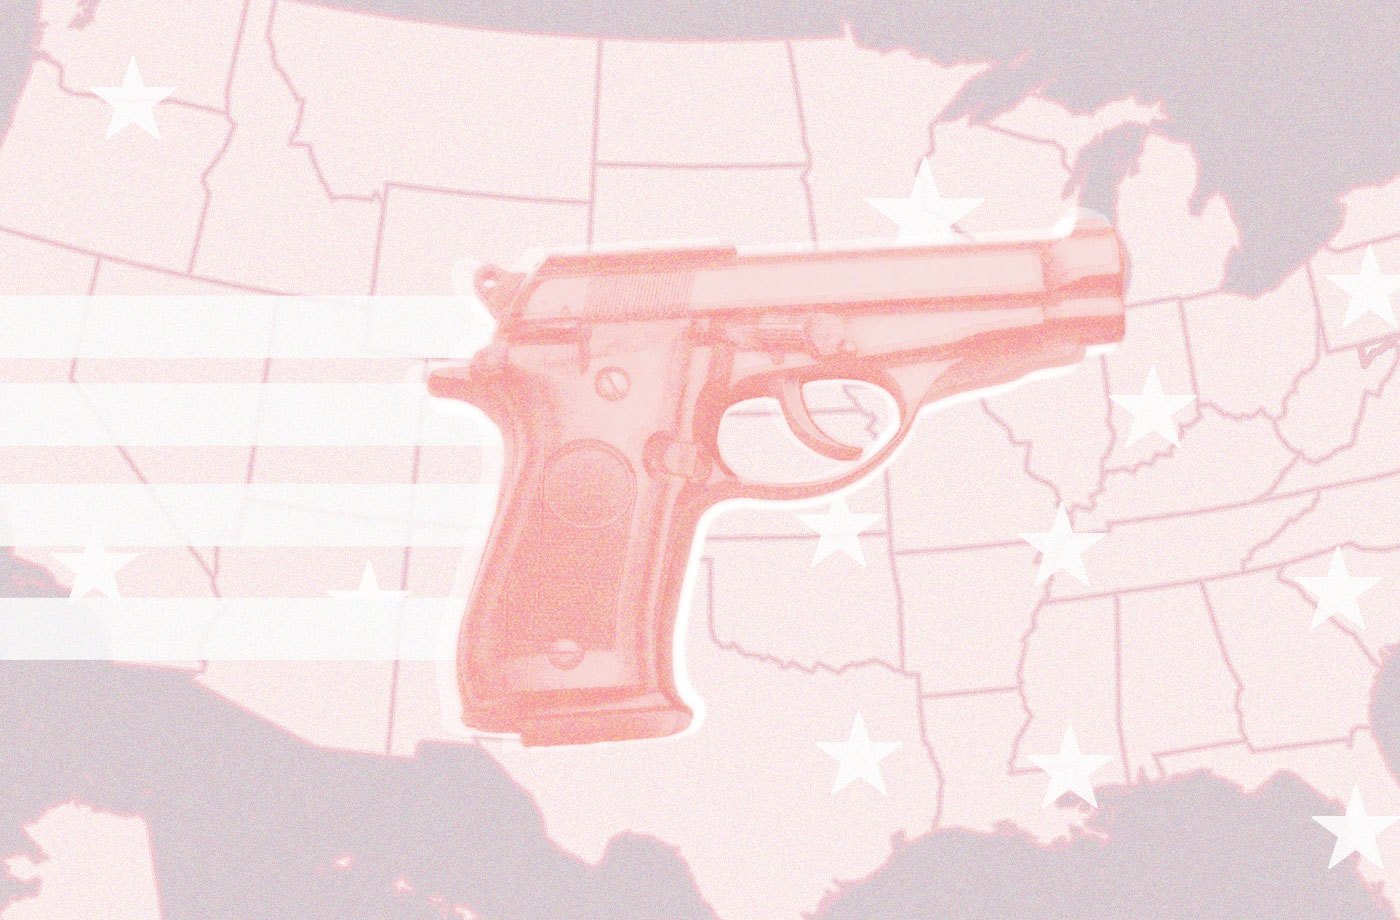 A graphic of a handgun over a map of the United States to represent gun violence in America.